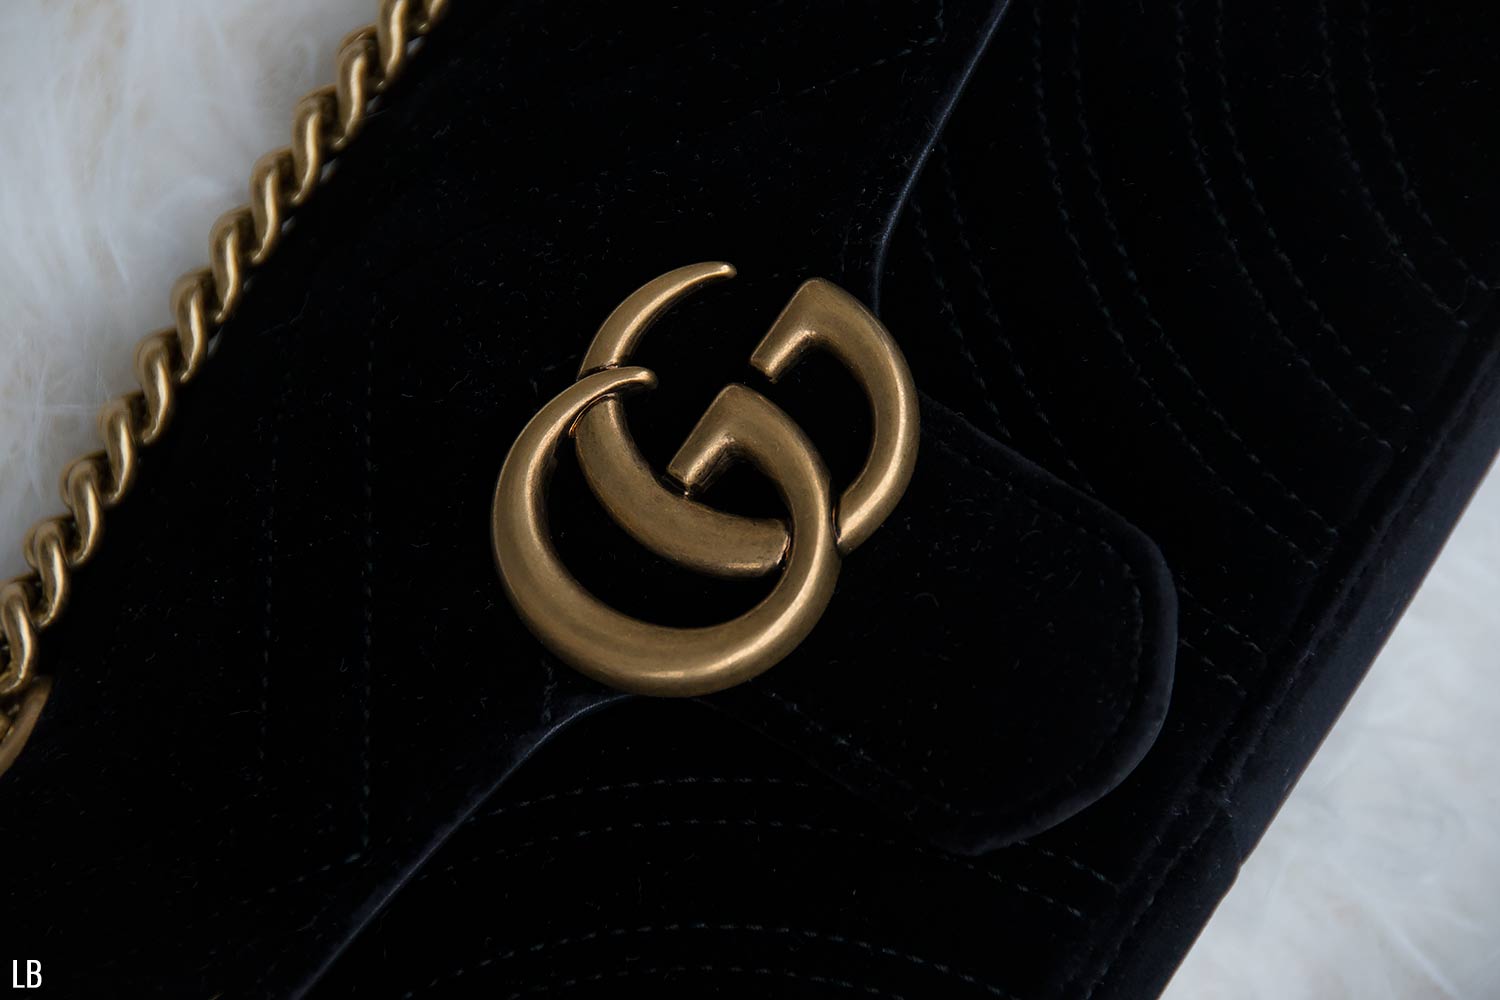 GUCCI MARMONT BAG ALL SIZES 